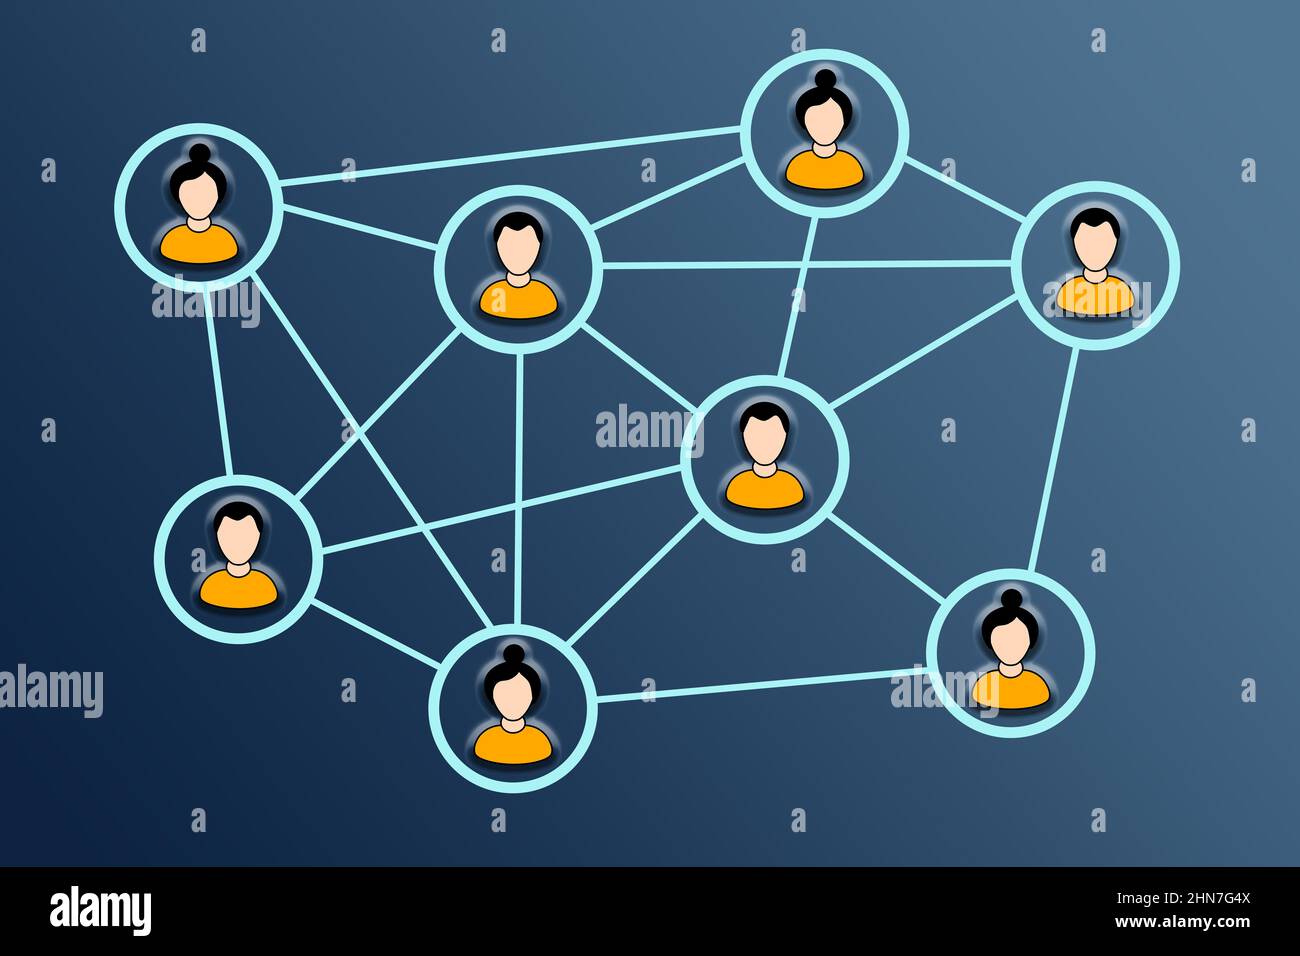 Teamwork. Team members interconnected in a network, sharing information and knowledge Stock Photo